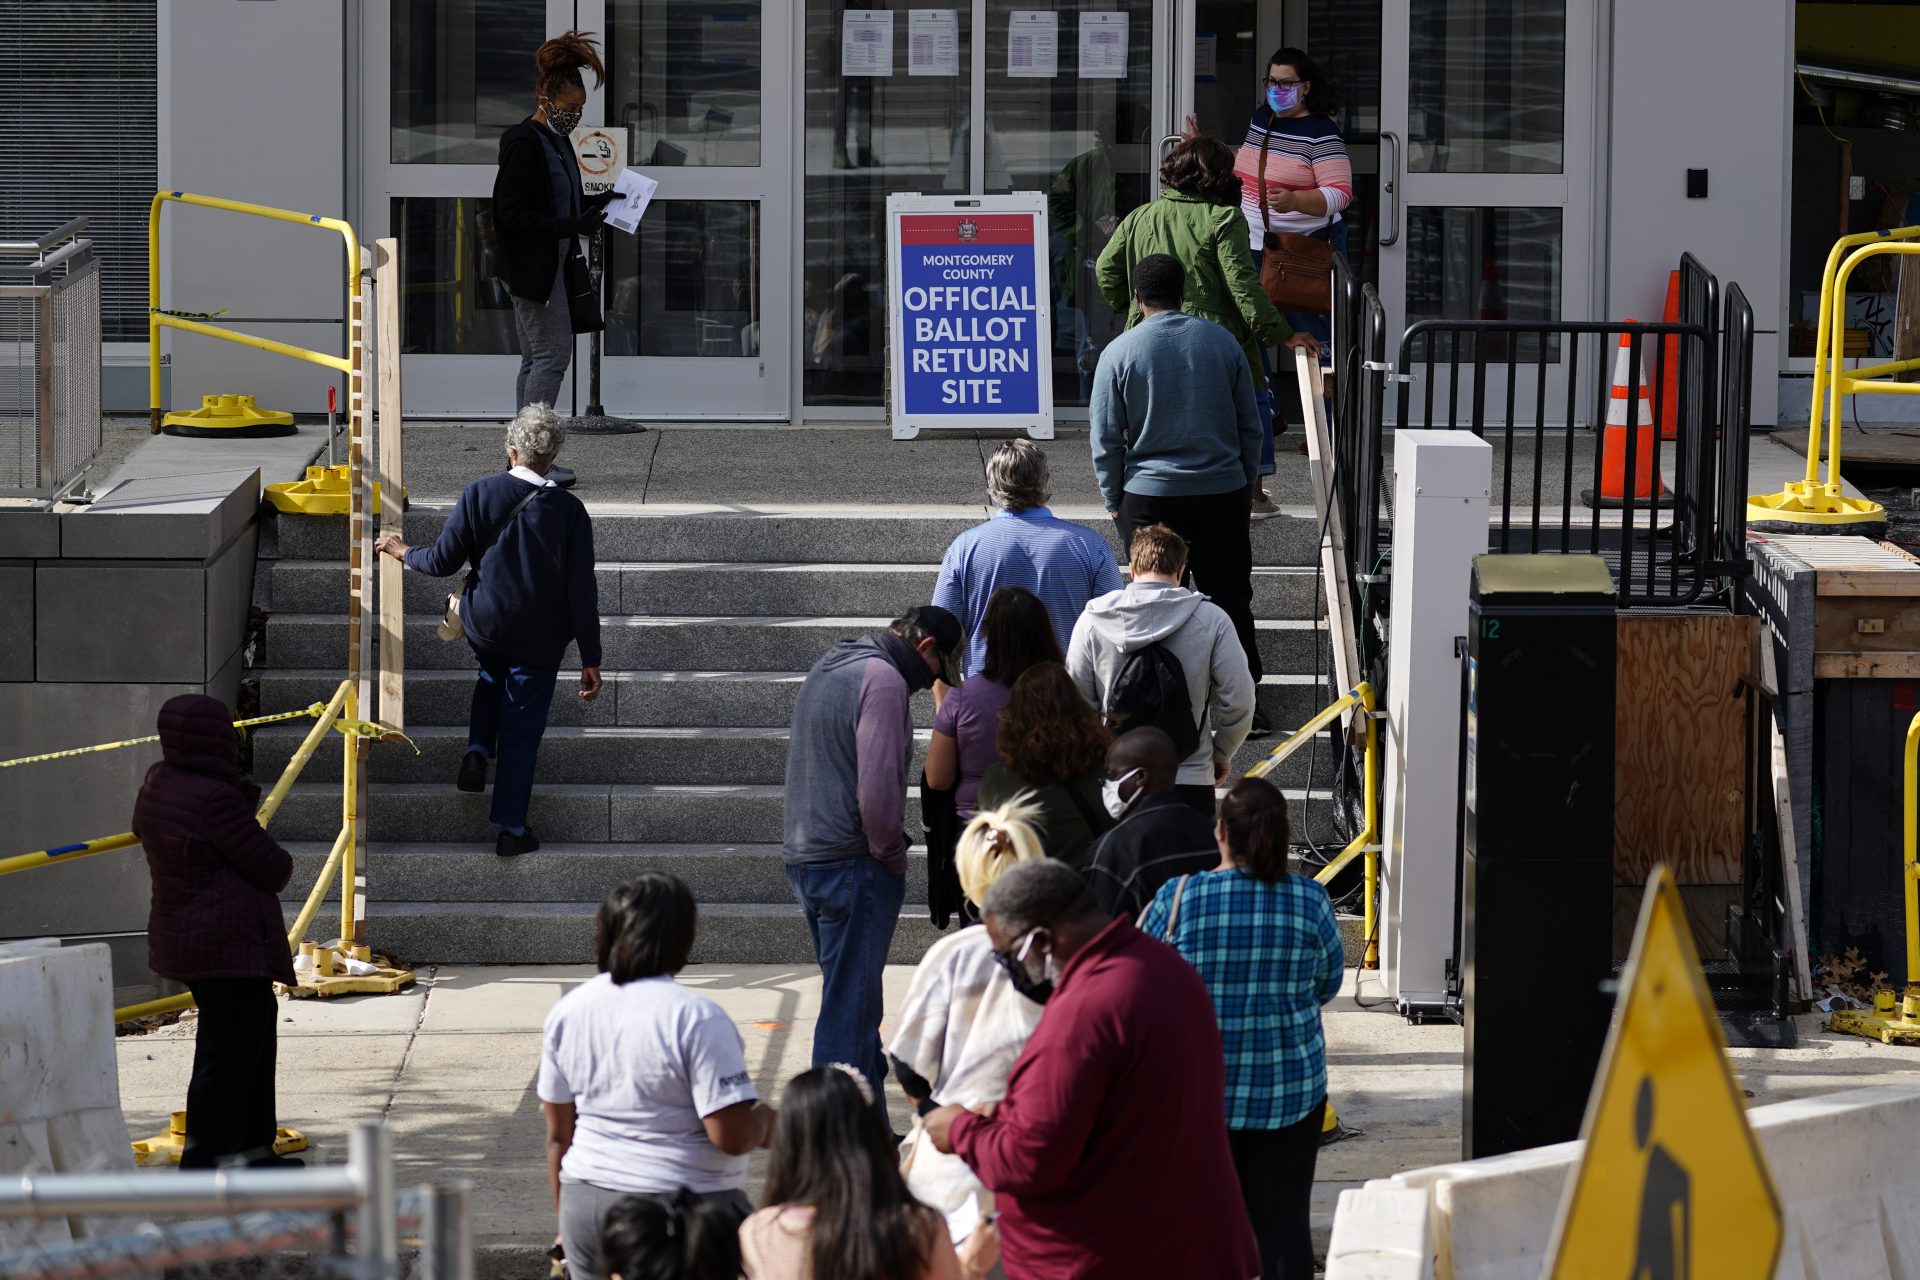 Residents line up outside the Montgomery County, Pa., Voter Services office, Monday, Oct. 19, 2020, in Norristown, Pa.